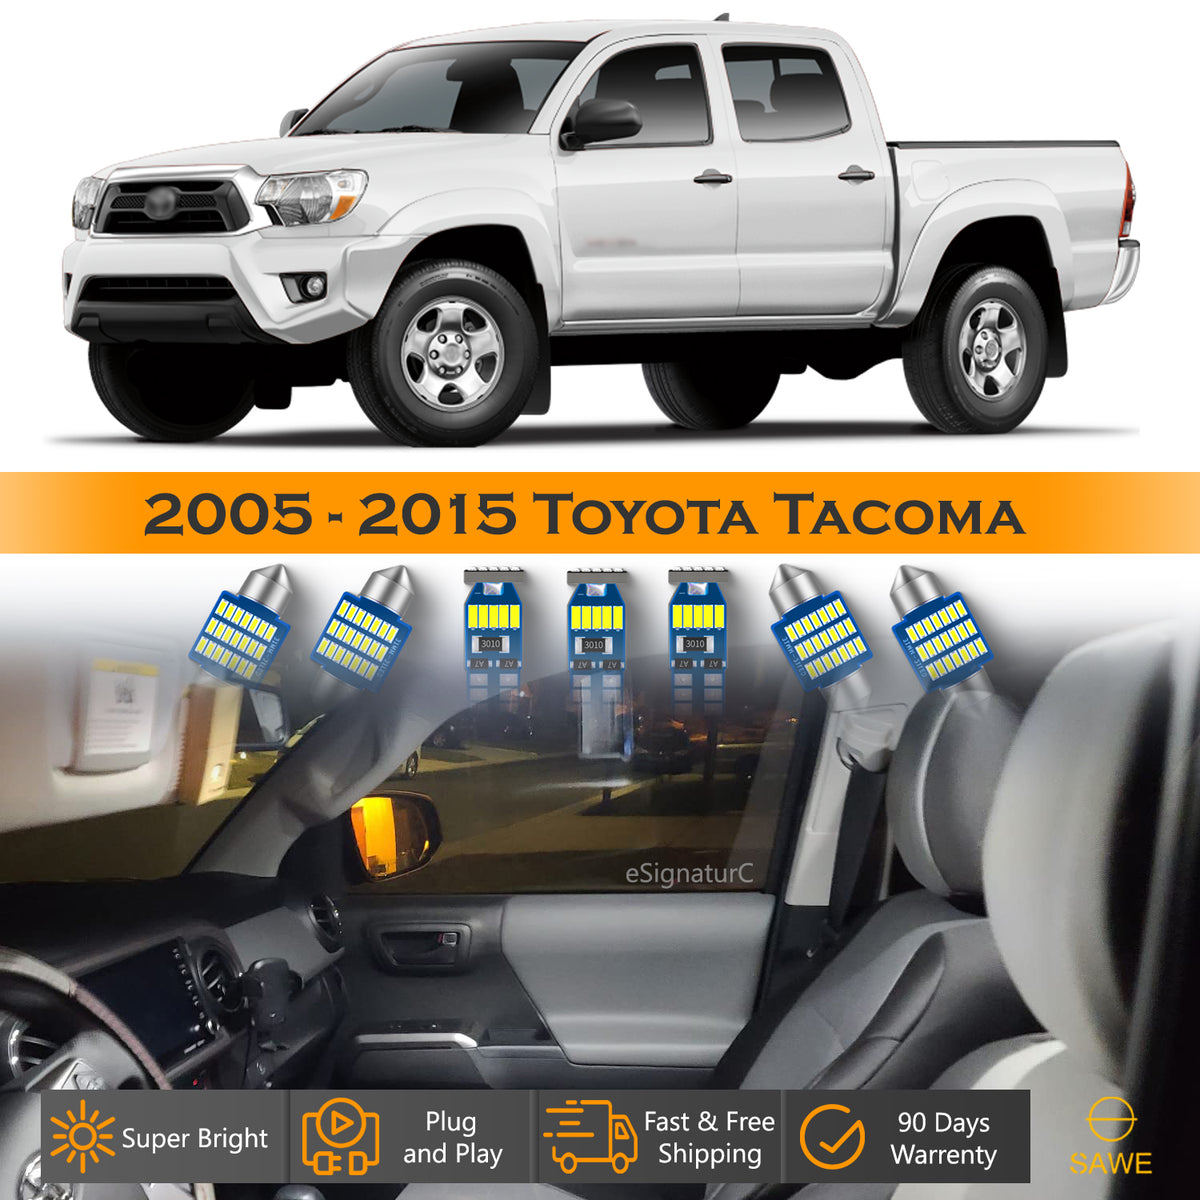 For Toyota Tacoma Interior LED Lights - Dome & Map Lights Package Kit for 2005 - 2015 - White